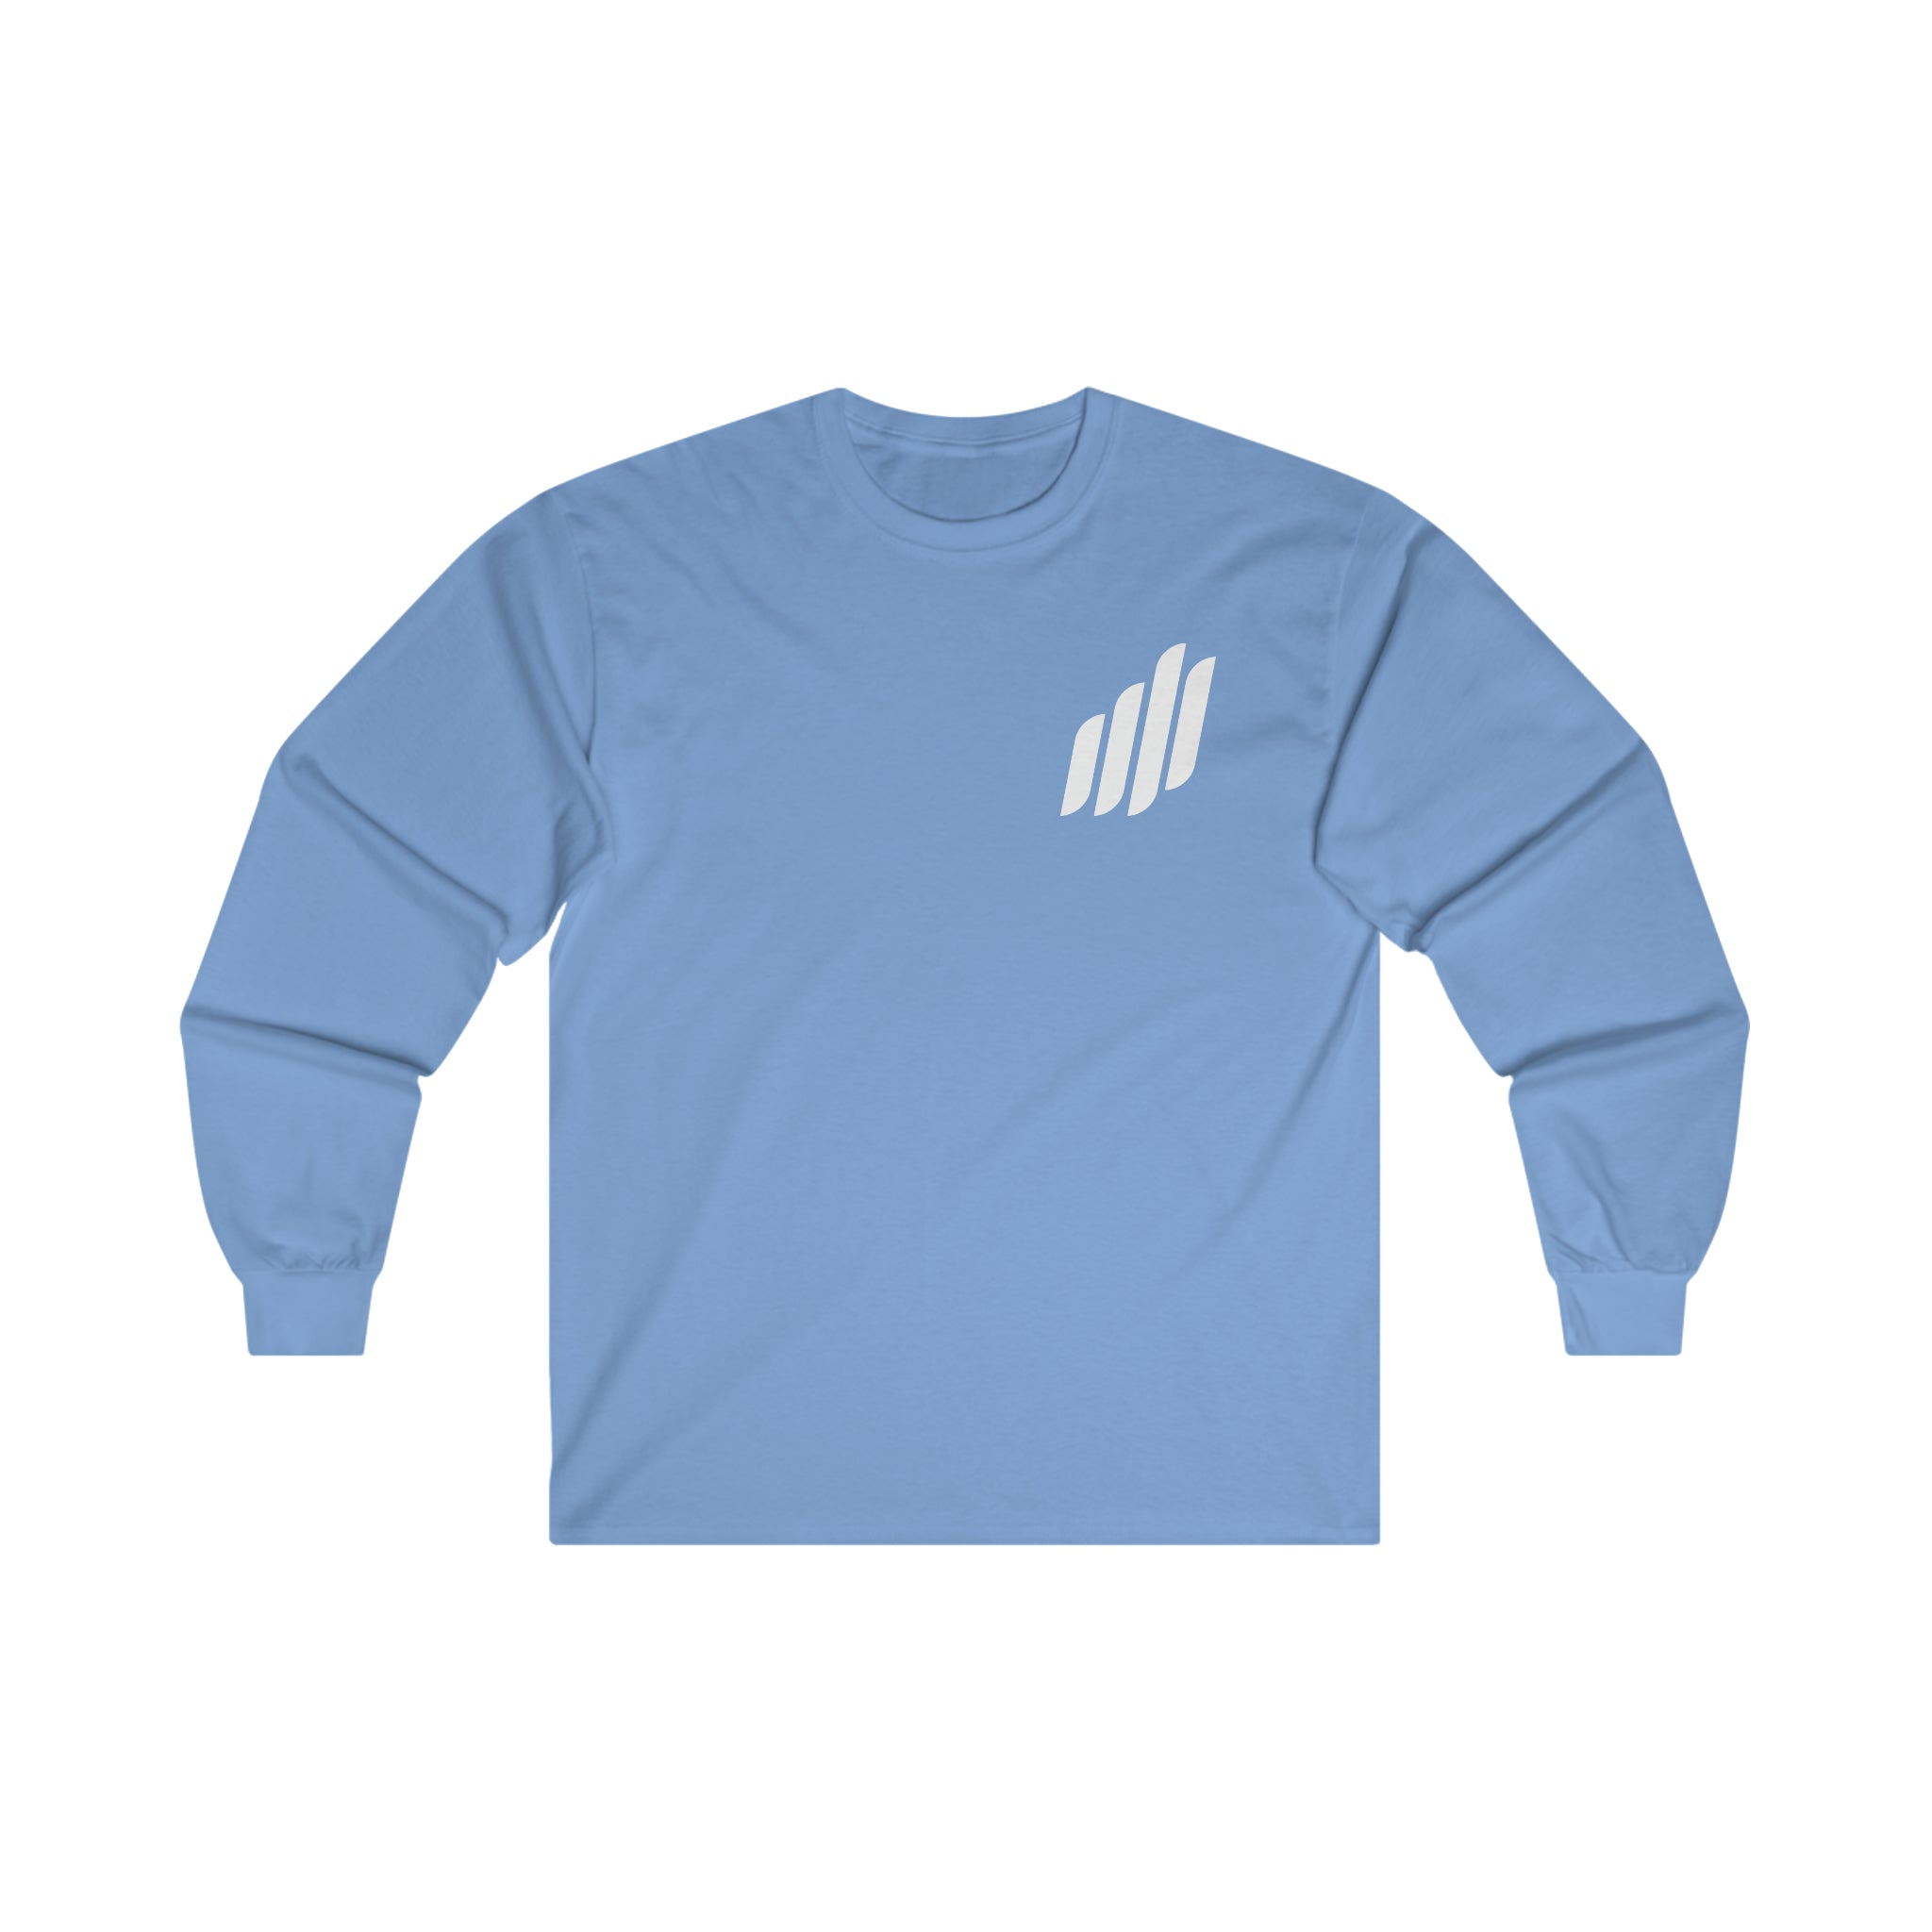 Discover Sound - Ultra Cotton Long Sleeve Tee